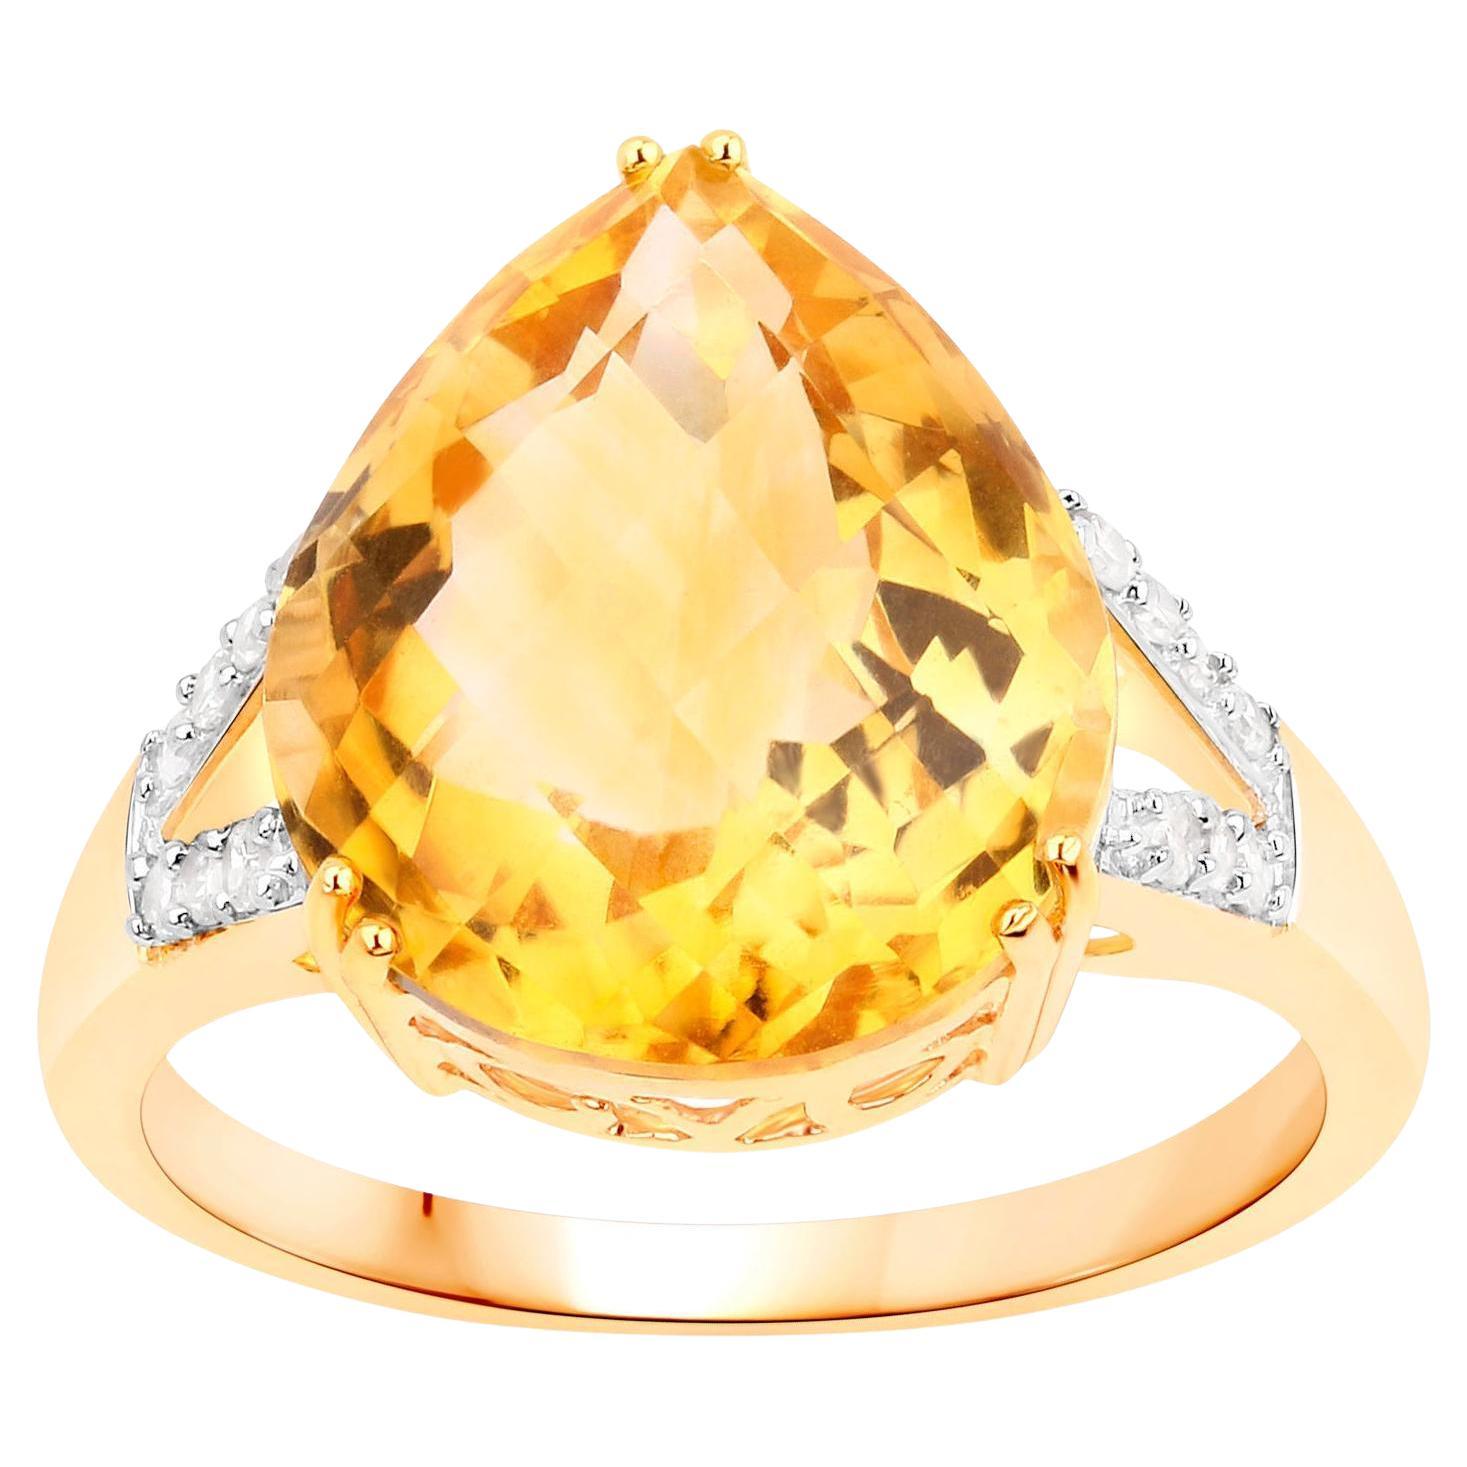 Citrine Ring With Diamonds 7.37 Carats 14K Yellow Gold For Sale